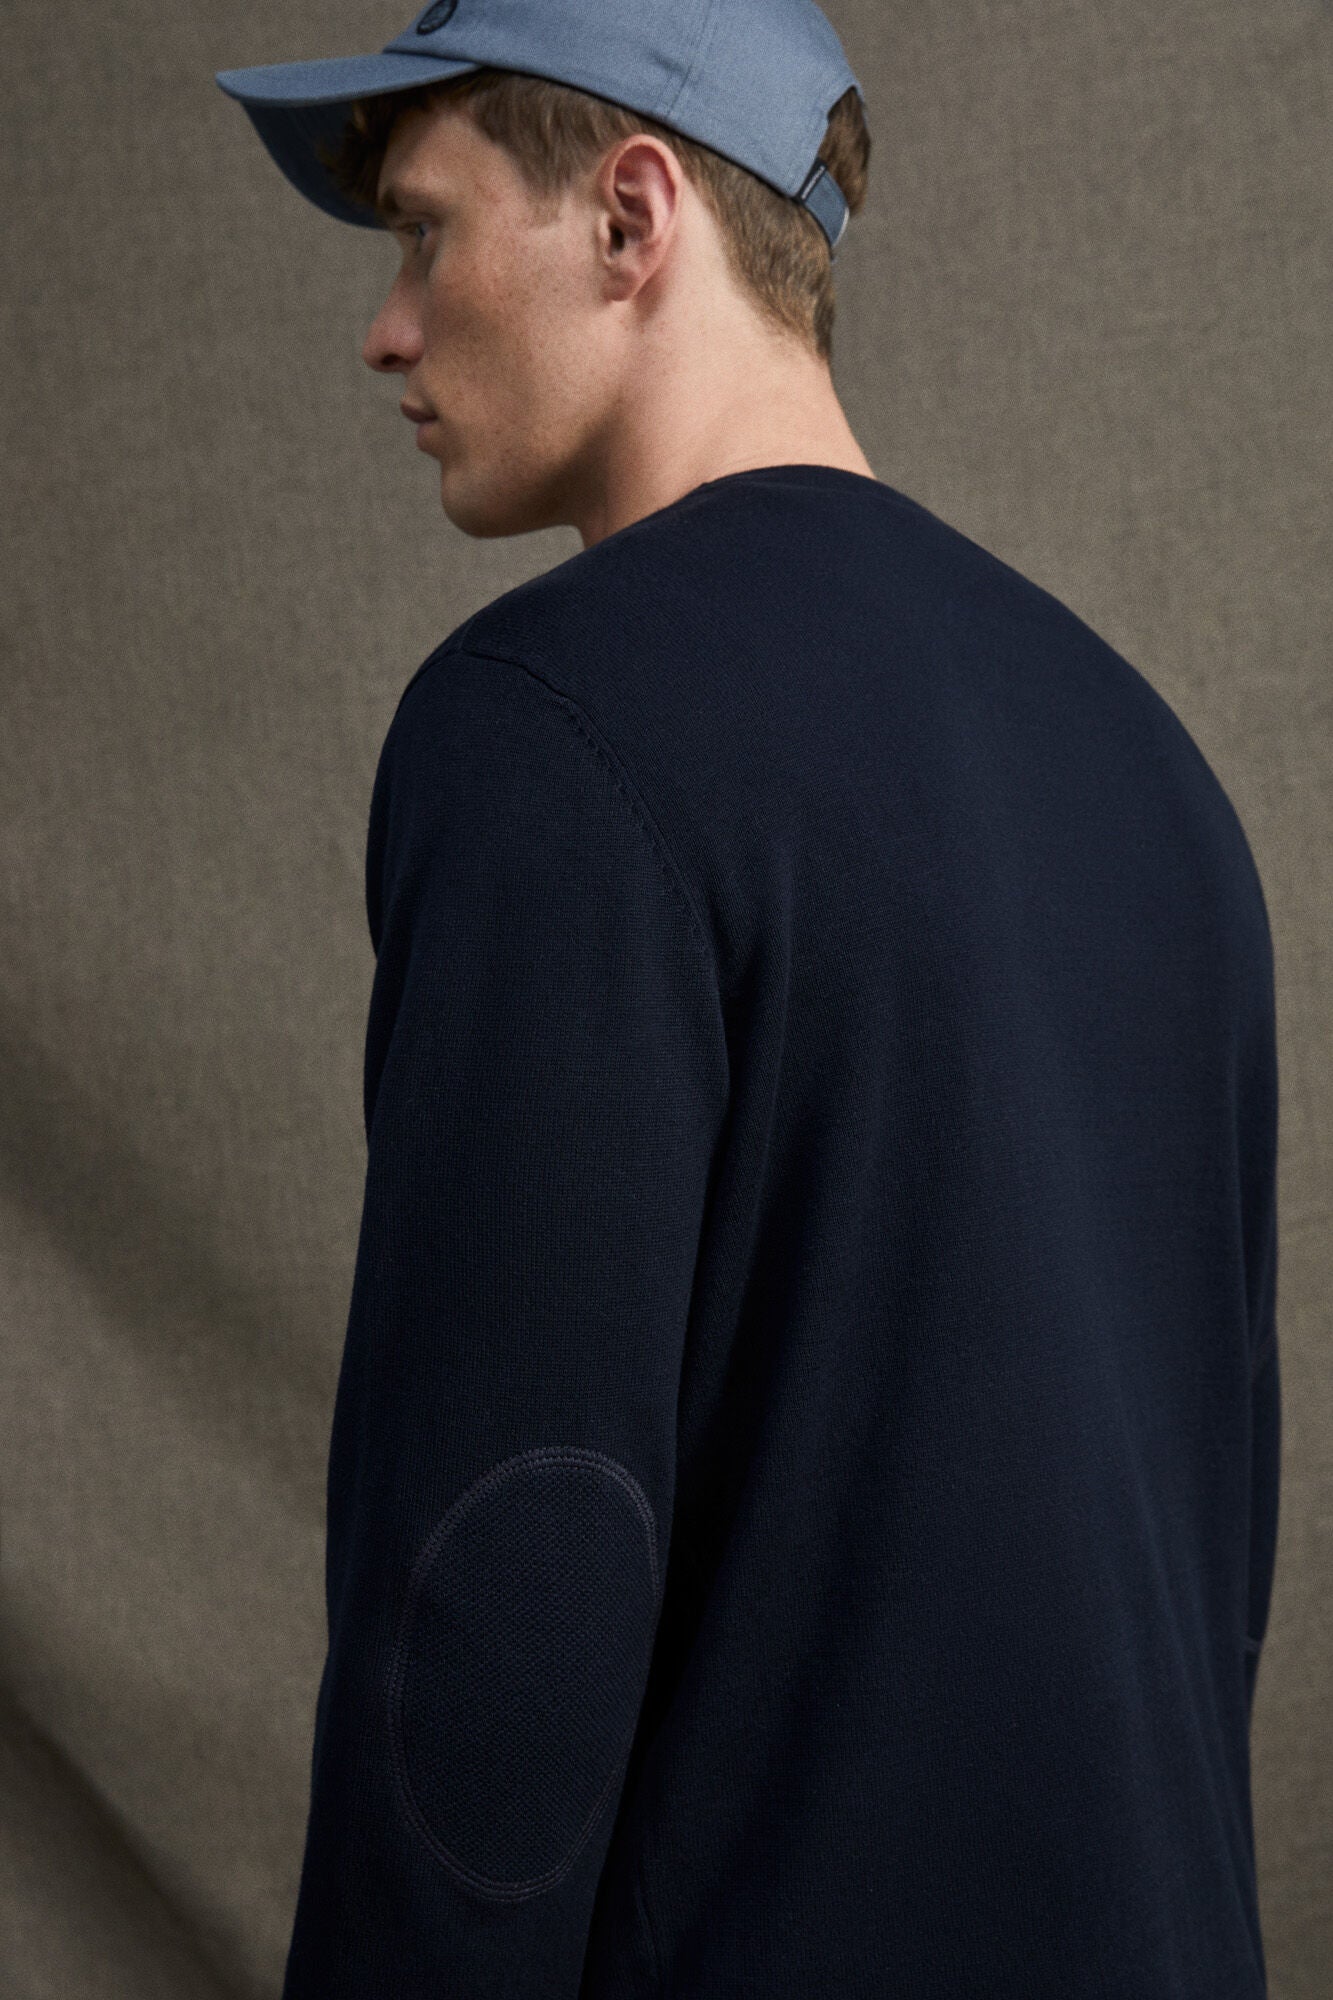 Essential jumper with elbow patches